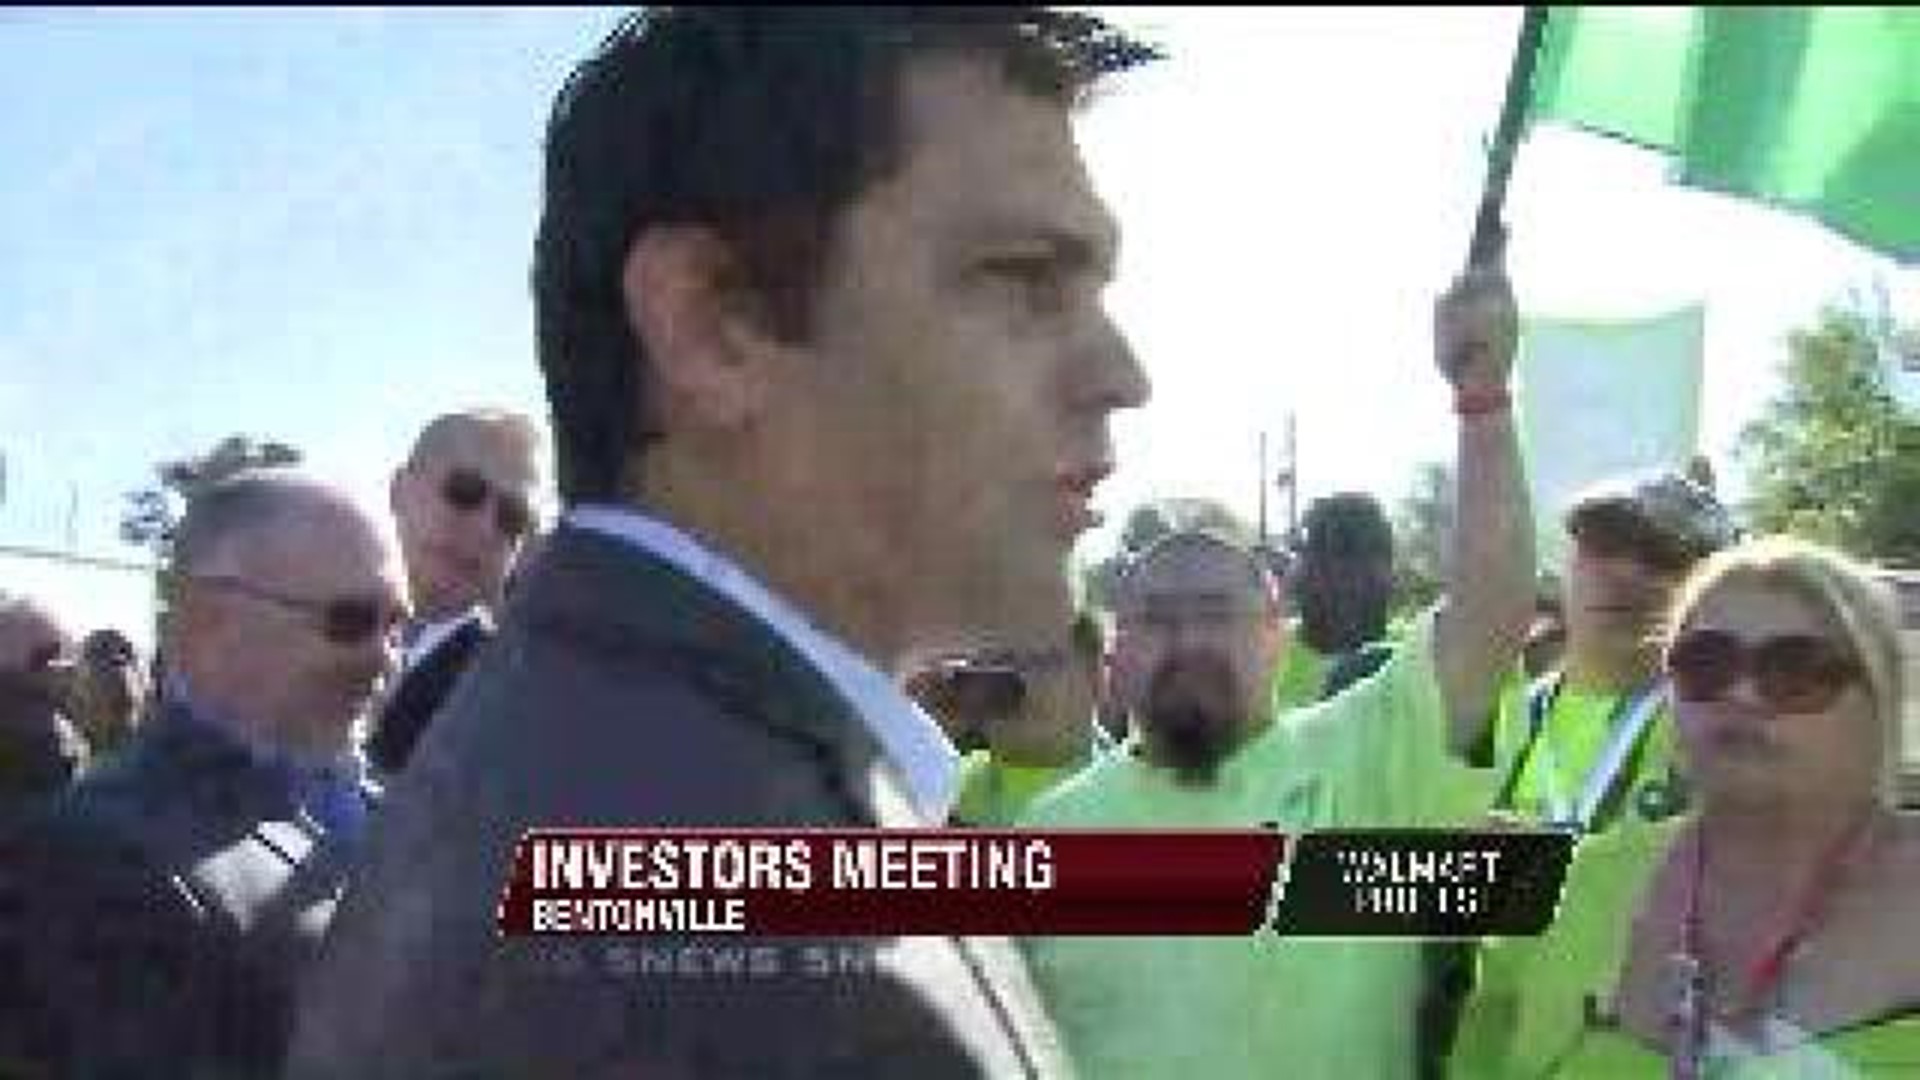 Workers Protest at Investors Meeting